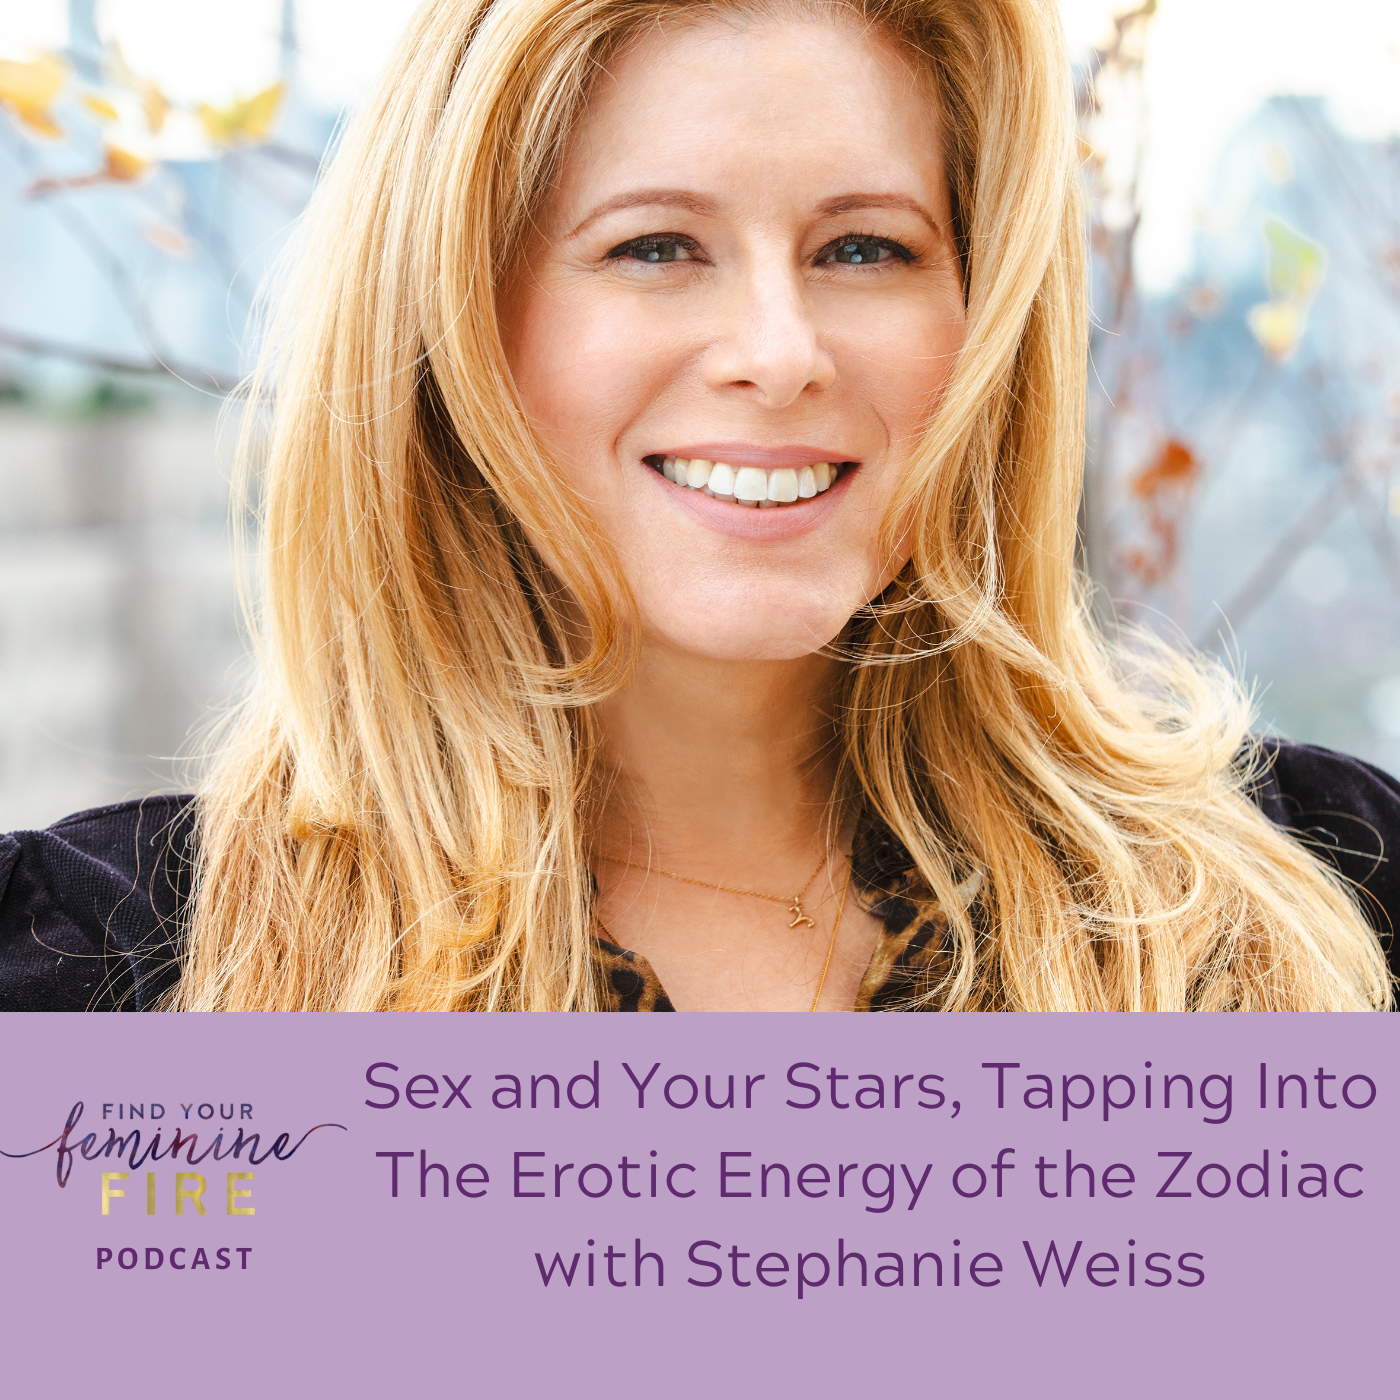 Sex and Your Stars, Tapping Into The Erotic Energy of the Zodiac with Stephanie Weiss